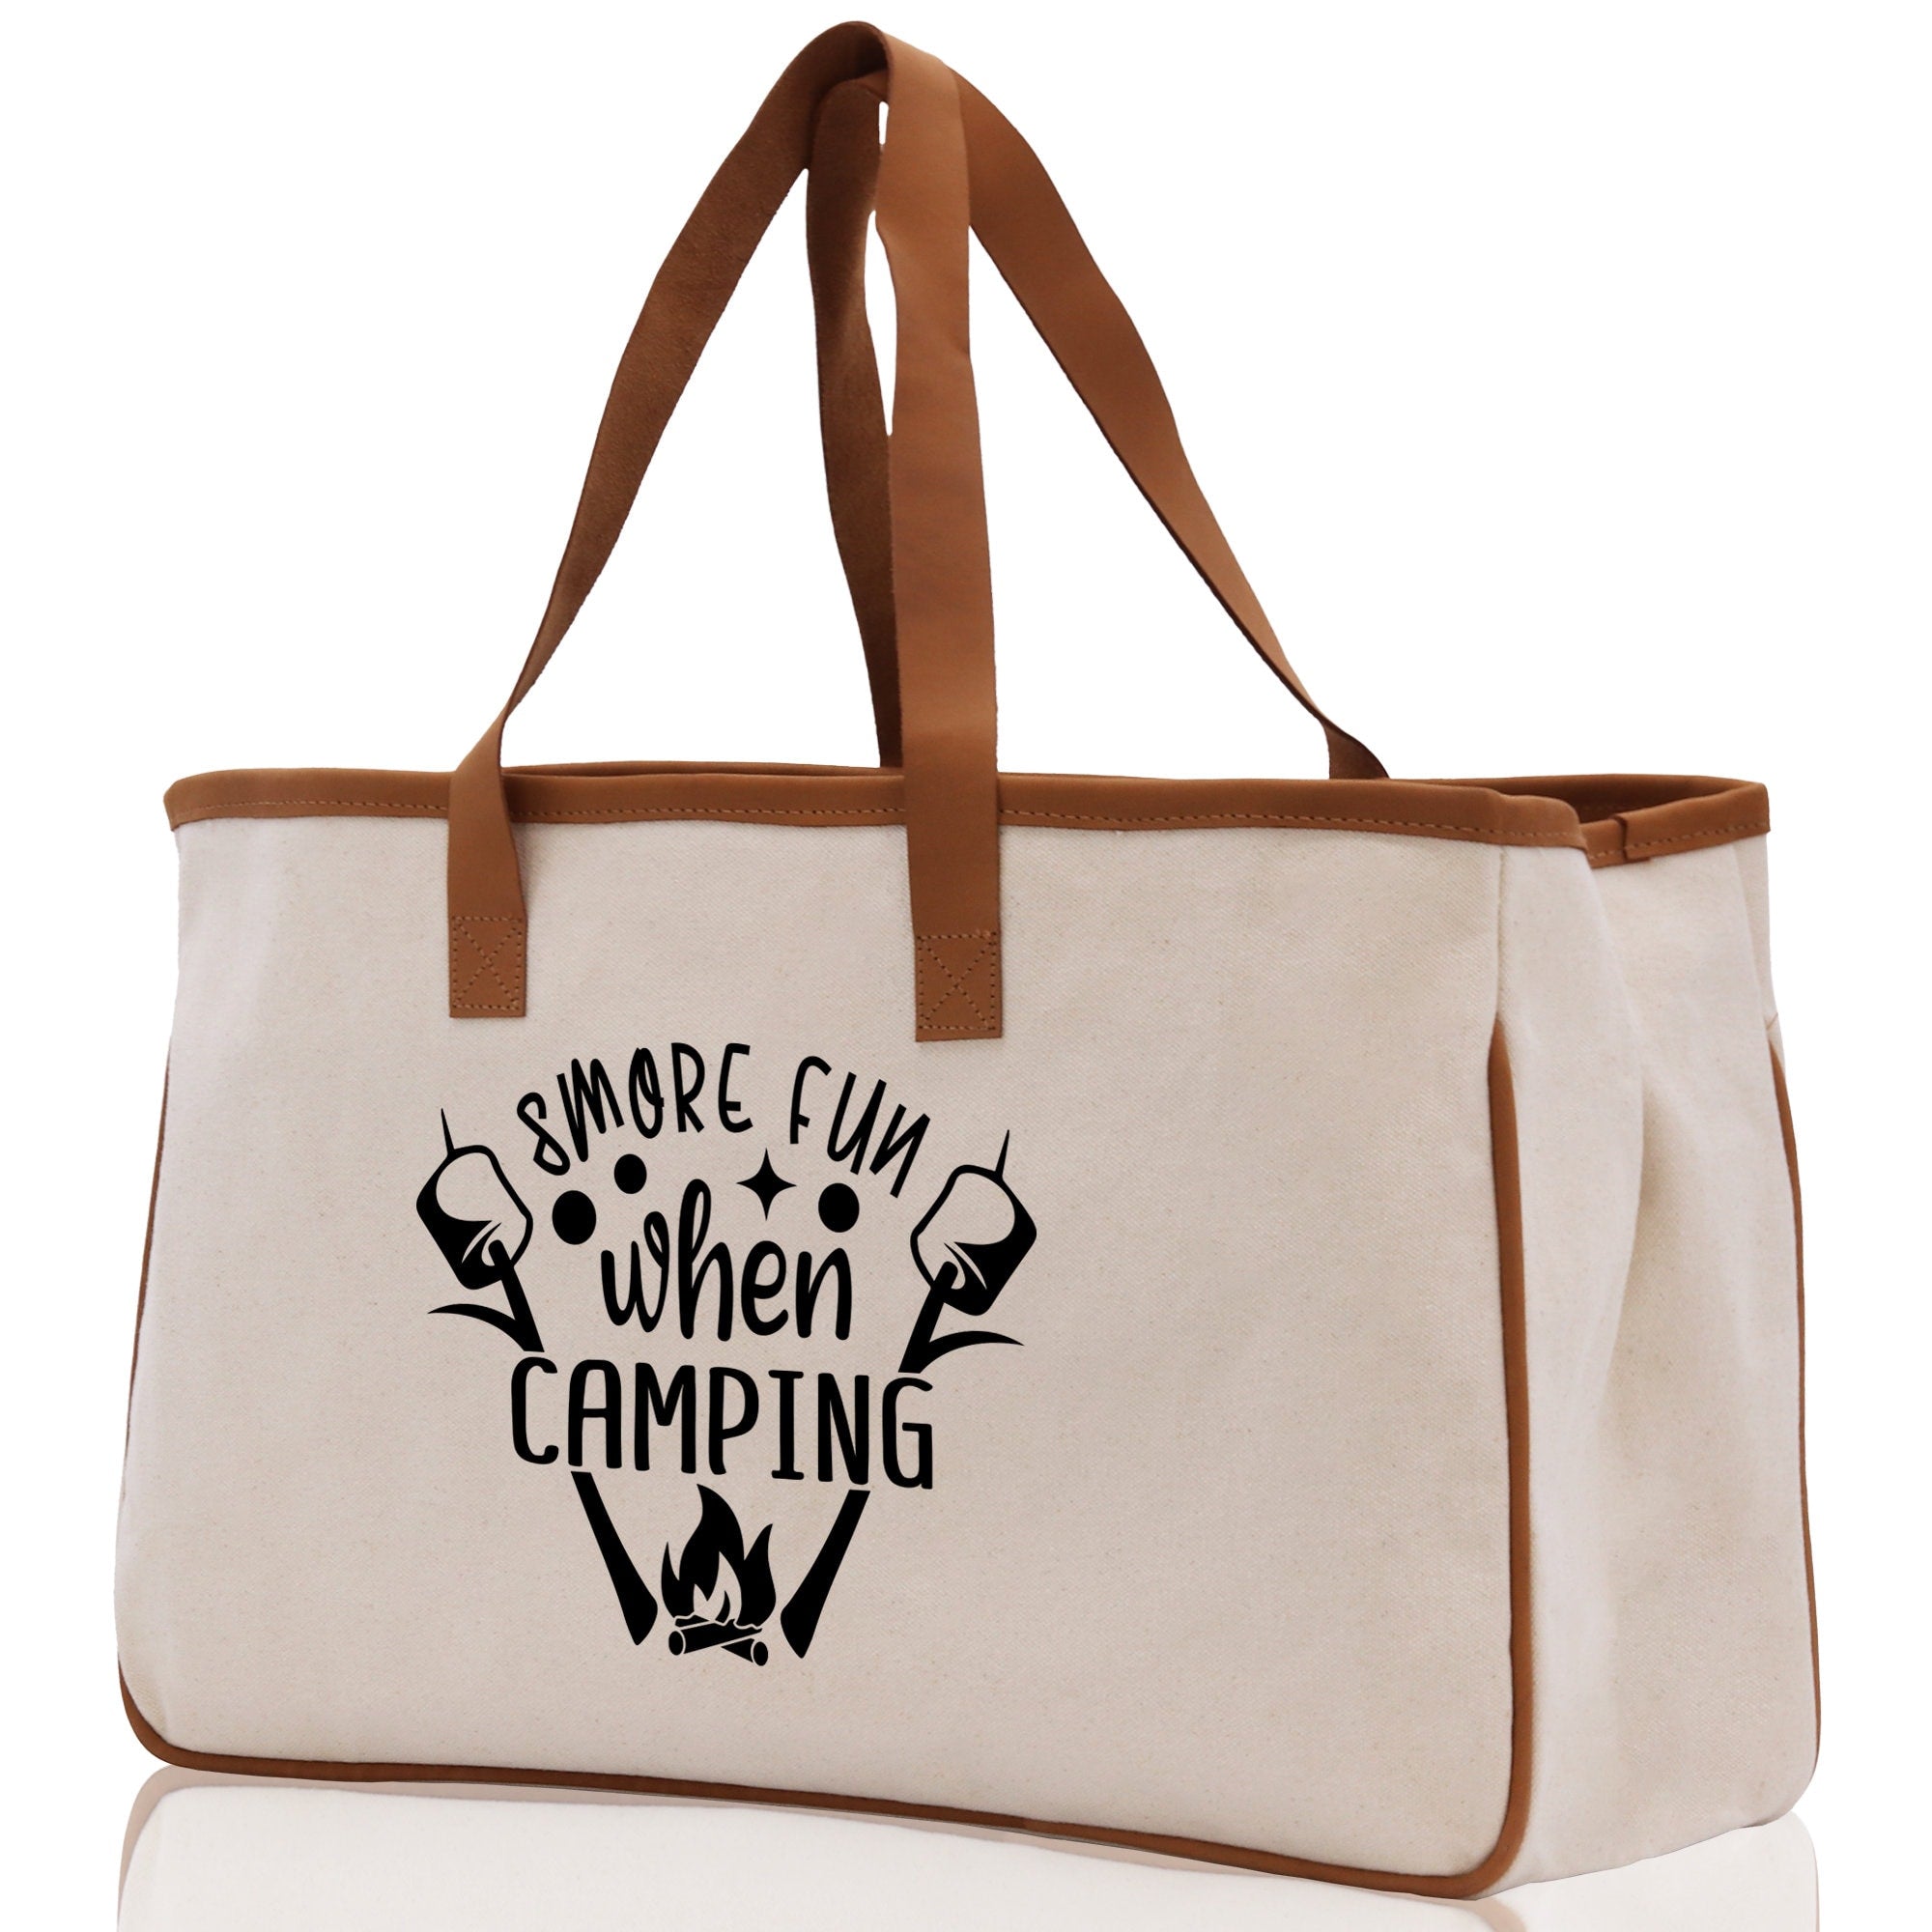 Smore Fun When Camping Cotton Canvas Chic Tote Bag Camping Tote Camping Lover Gift Tote Bag Outdoor Tote Weekender Tote Camper Tote